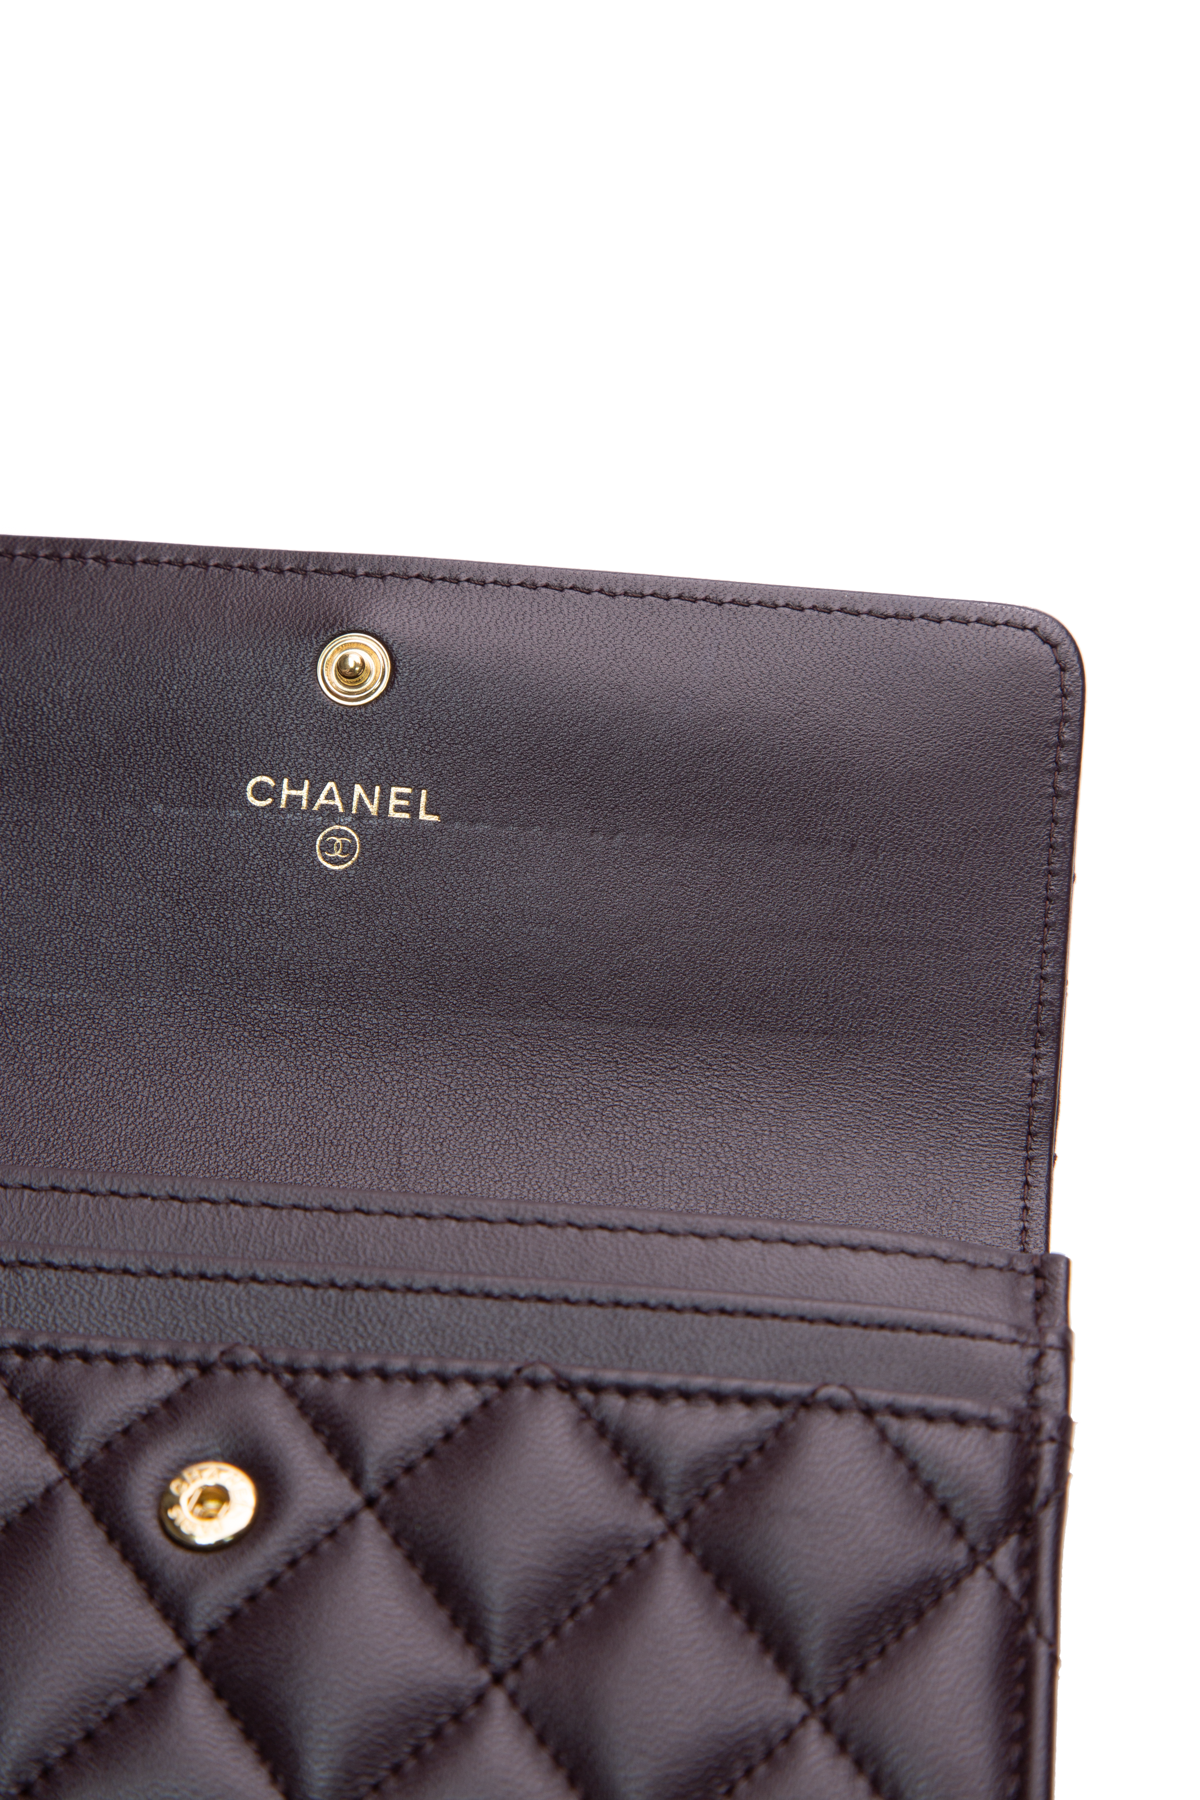 Chanel Medium Flap Wallet - Couture USA